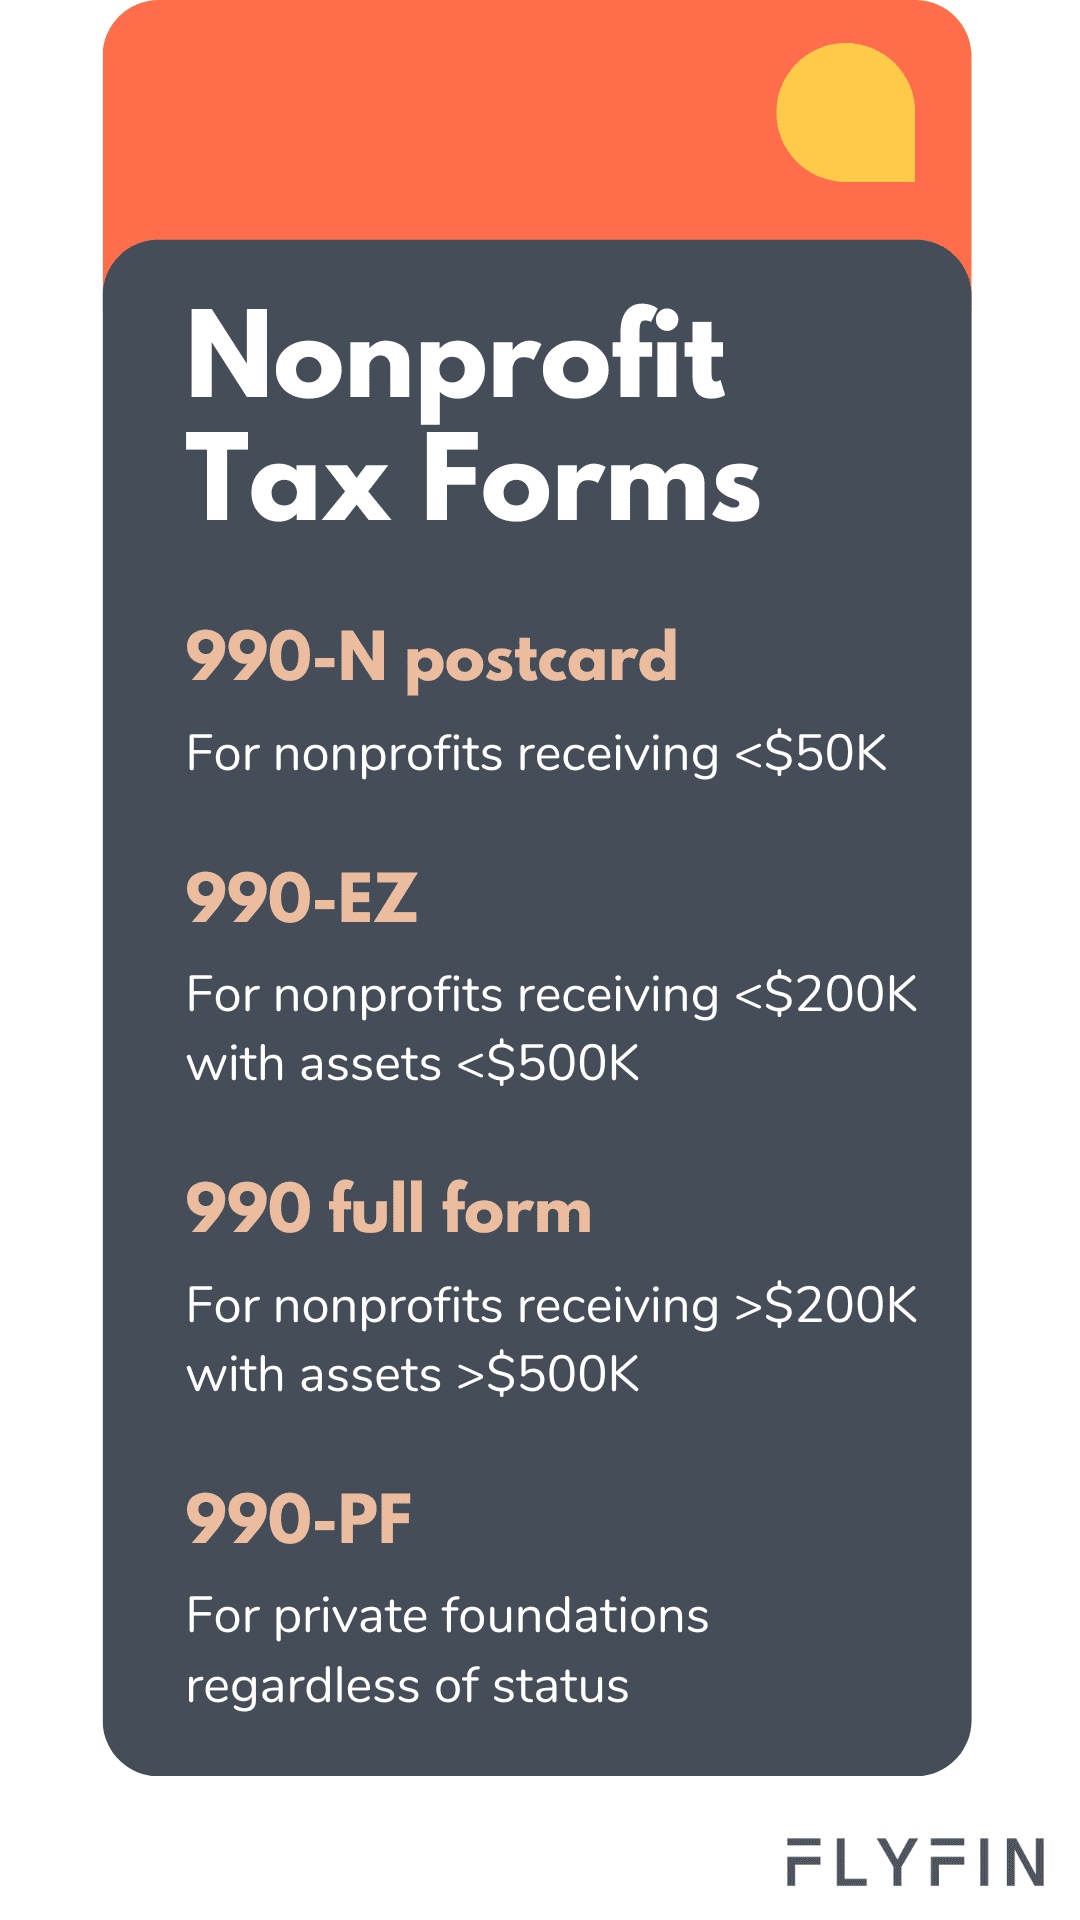 Image describing tax forms for nonprofits based on their income and assets. Includes 990-N, 990-EZ, 990 full form, and 990-PF for private foundations. No relevance to self-employed, 1099, freelancer, or taxes.